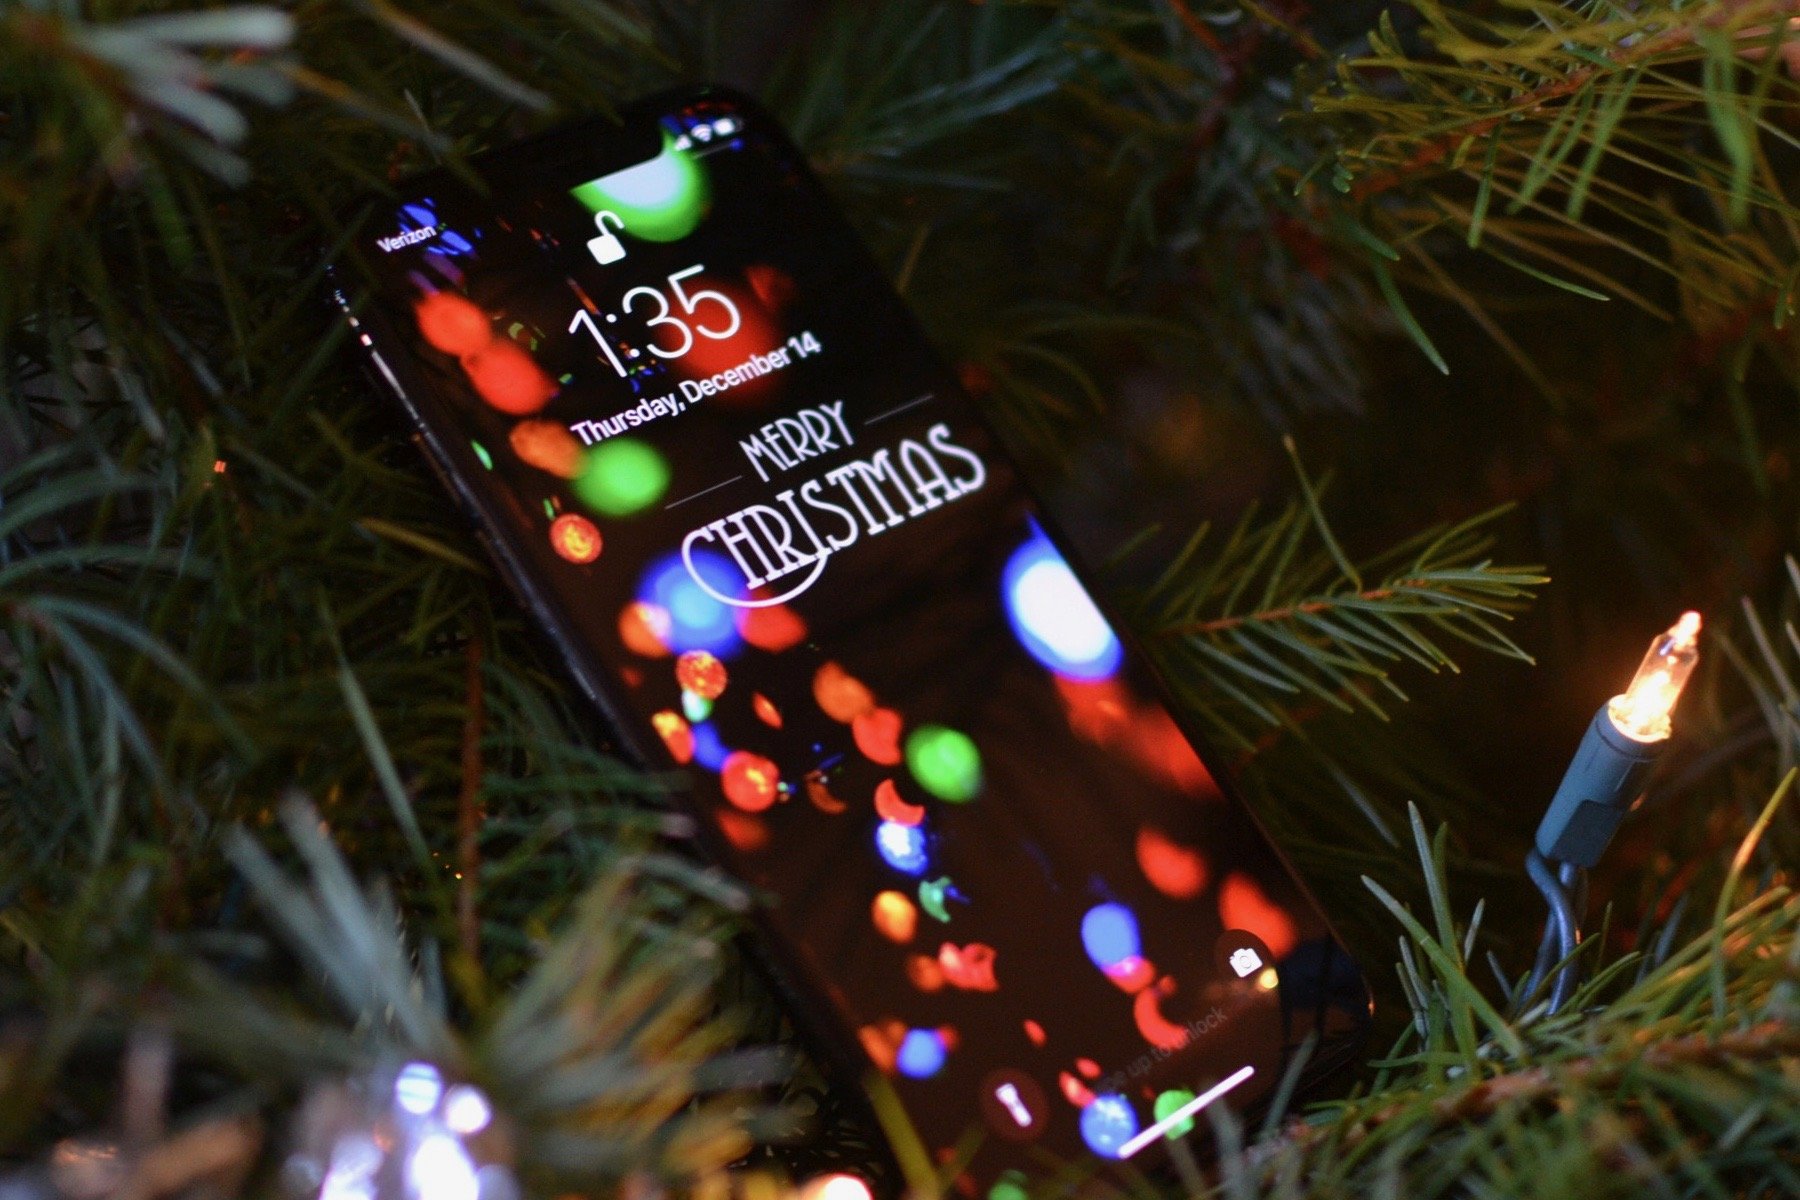 An iPhone with a festive background resting in a Christmas tree